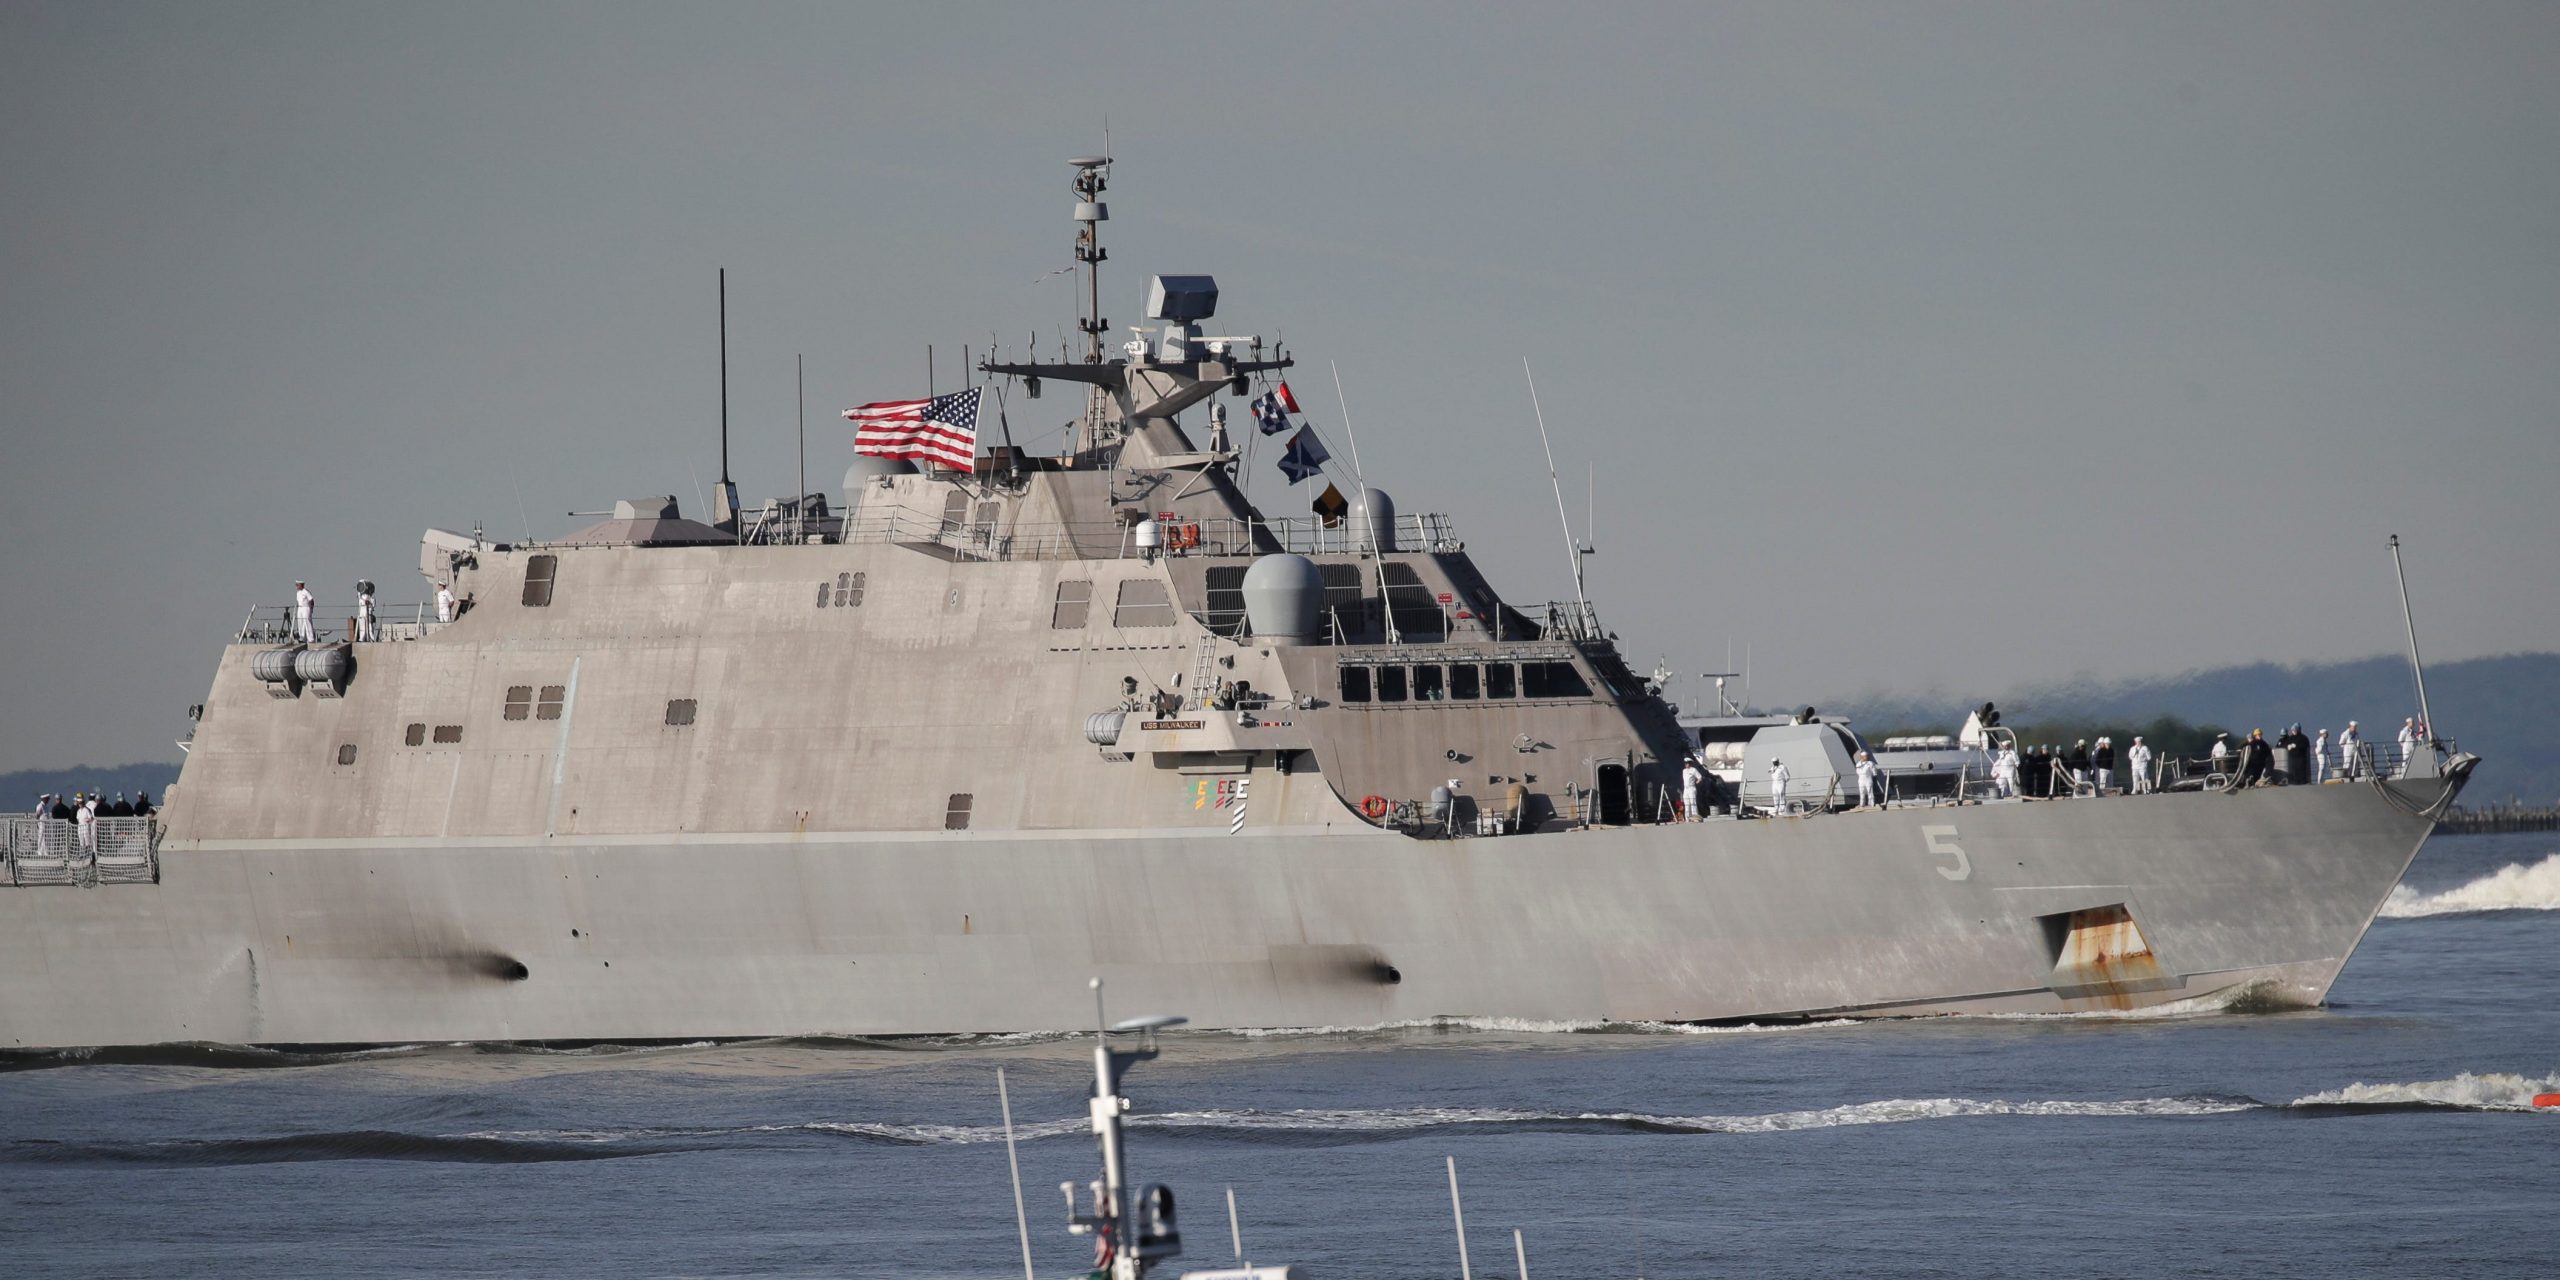 The USS Milwaukee (LCS-5) sails into New York Harbor at the start of the Fleet Week Parade of Ships, May 22, 2019 in New York City.